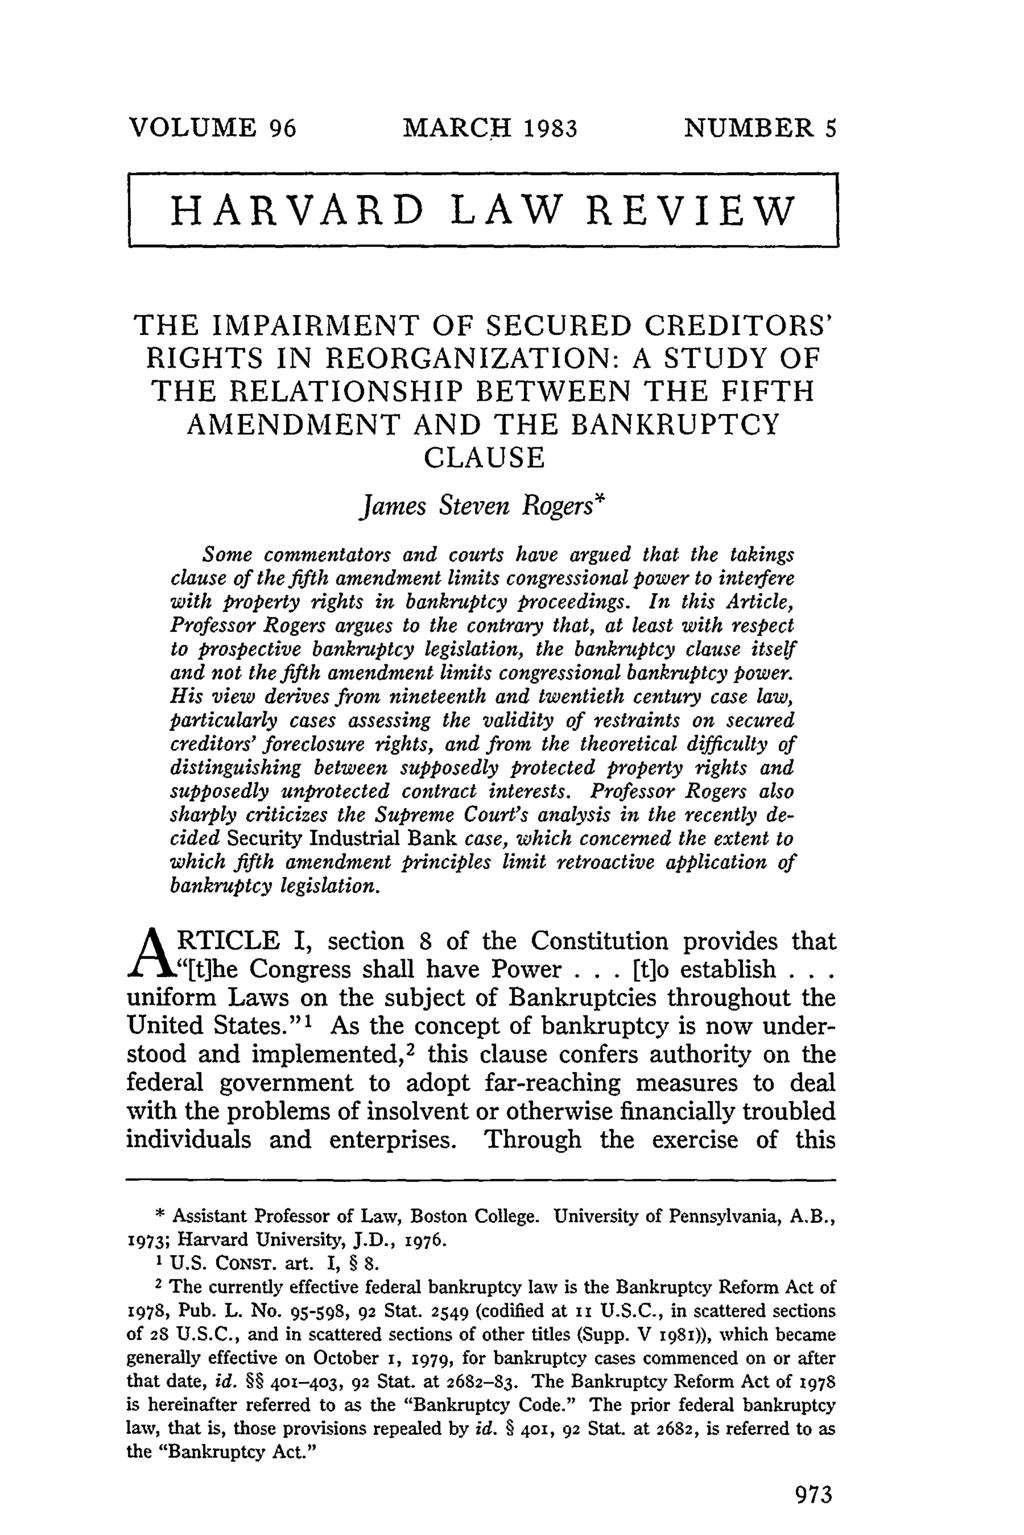 VOLUME 96 MARC:H 1983 NUMBER 5 HARVARD LAW REVIEW THE IMPAIRMENT OF SECURED CREDITORS' RIGHTS IN REORGANIZATION: A STUDY OF THE RELATIONSHIP BETWEEN THE FIFTH AMENDMENT AND THE BANKRUPTCY CLAUSE